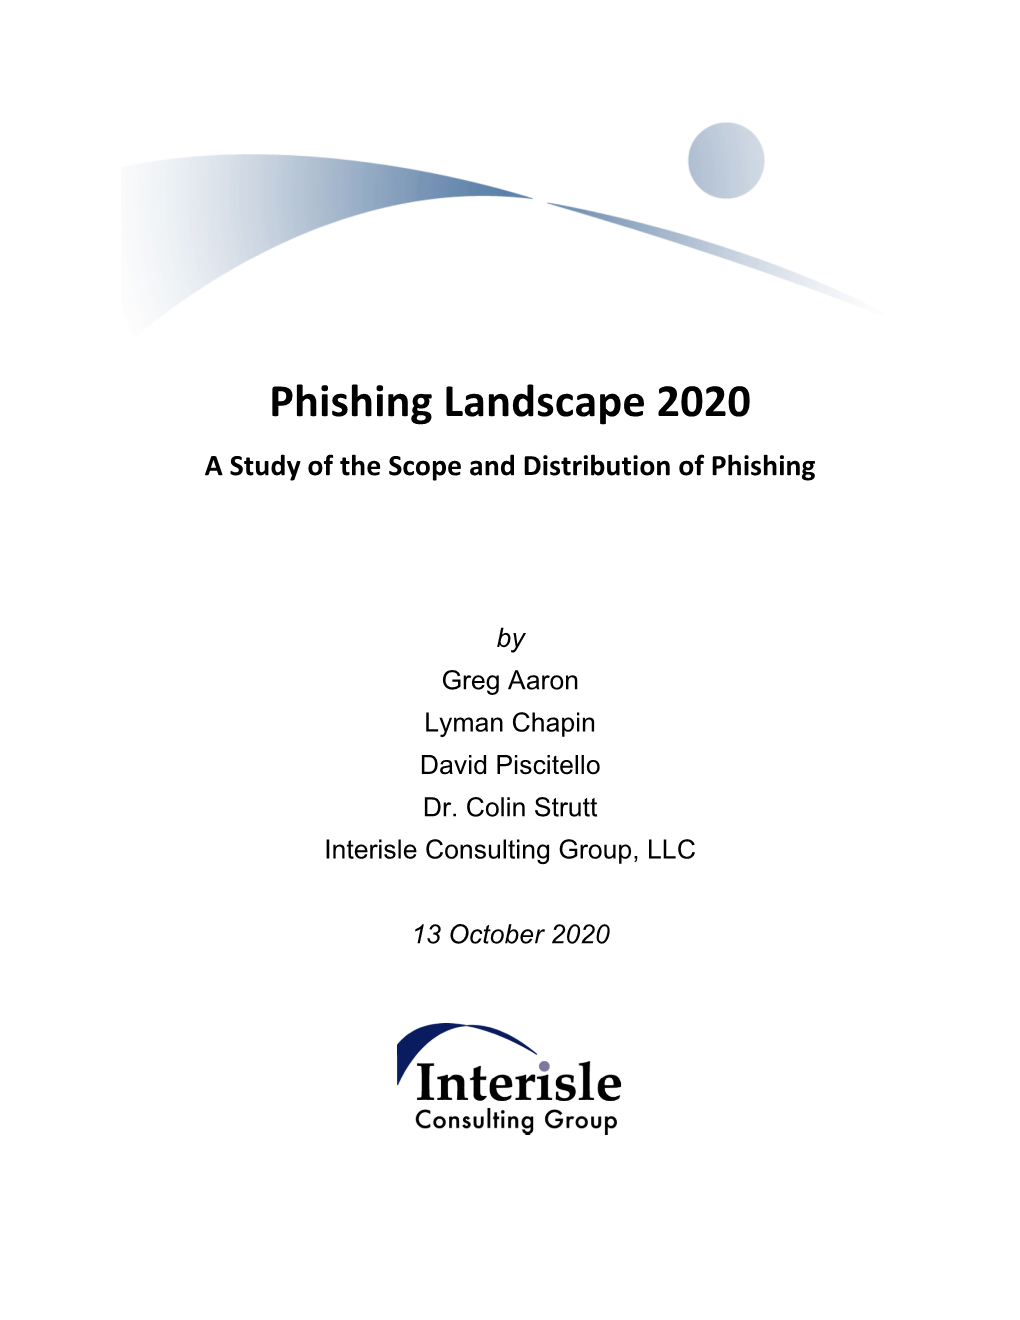 Phishing Landscape 2020 a Study of the Scope and Distribution of Phishing